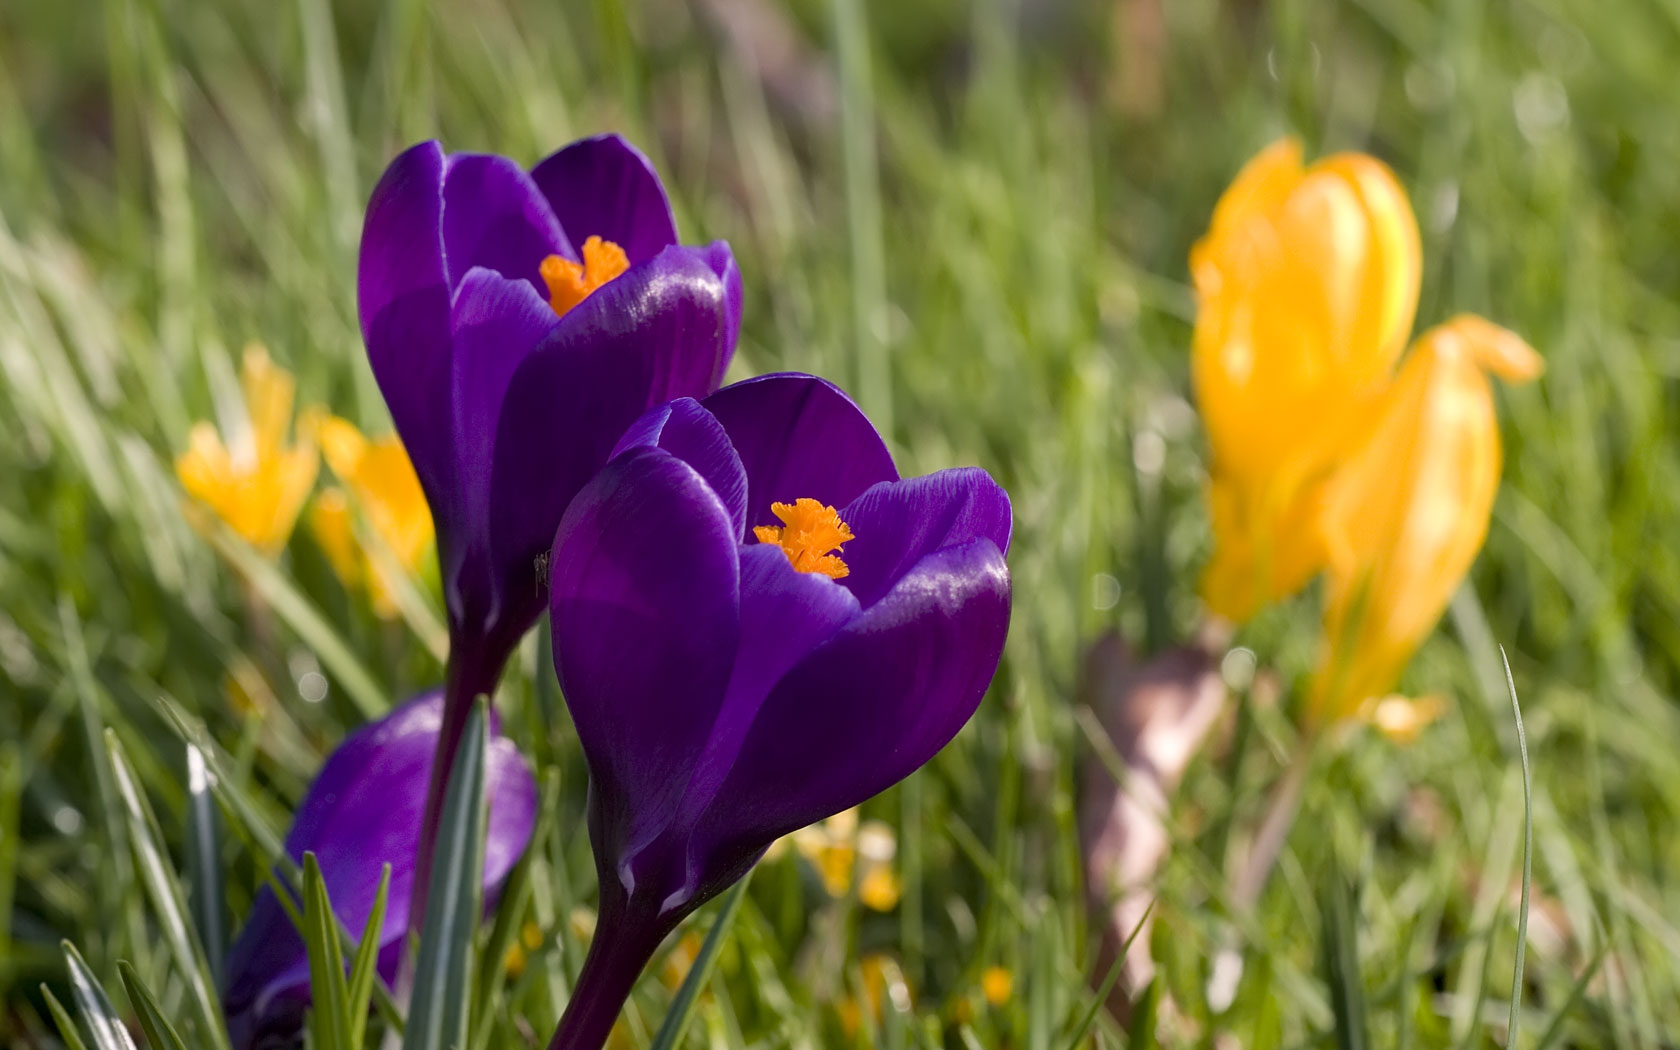  spring wallpapers category of free hd wallpapers spring screensavers